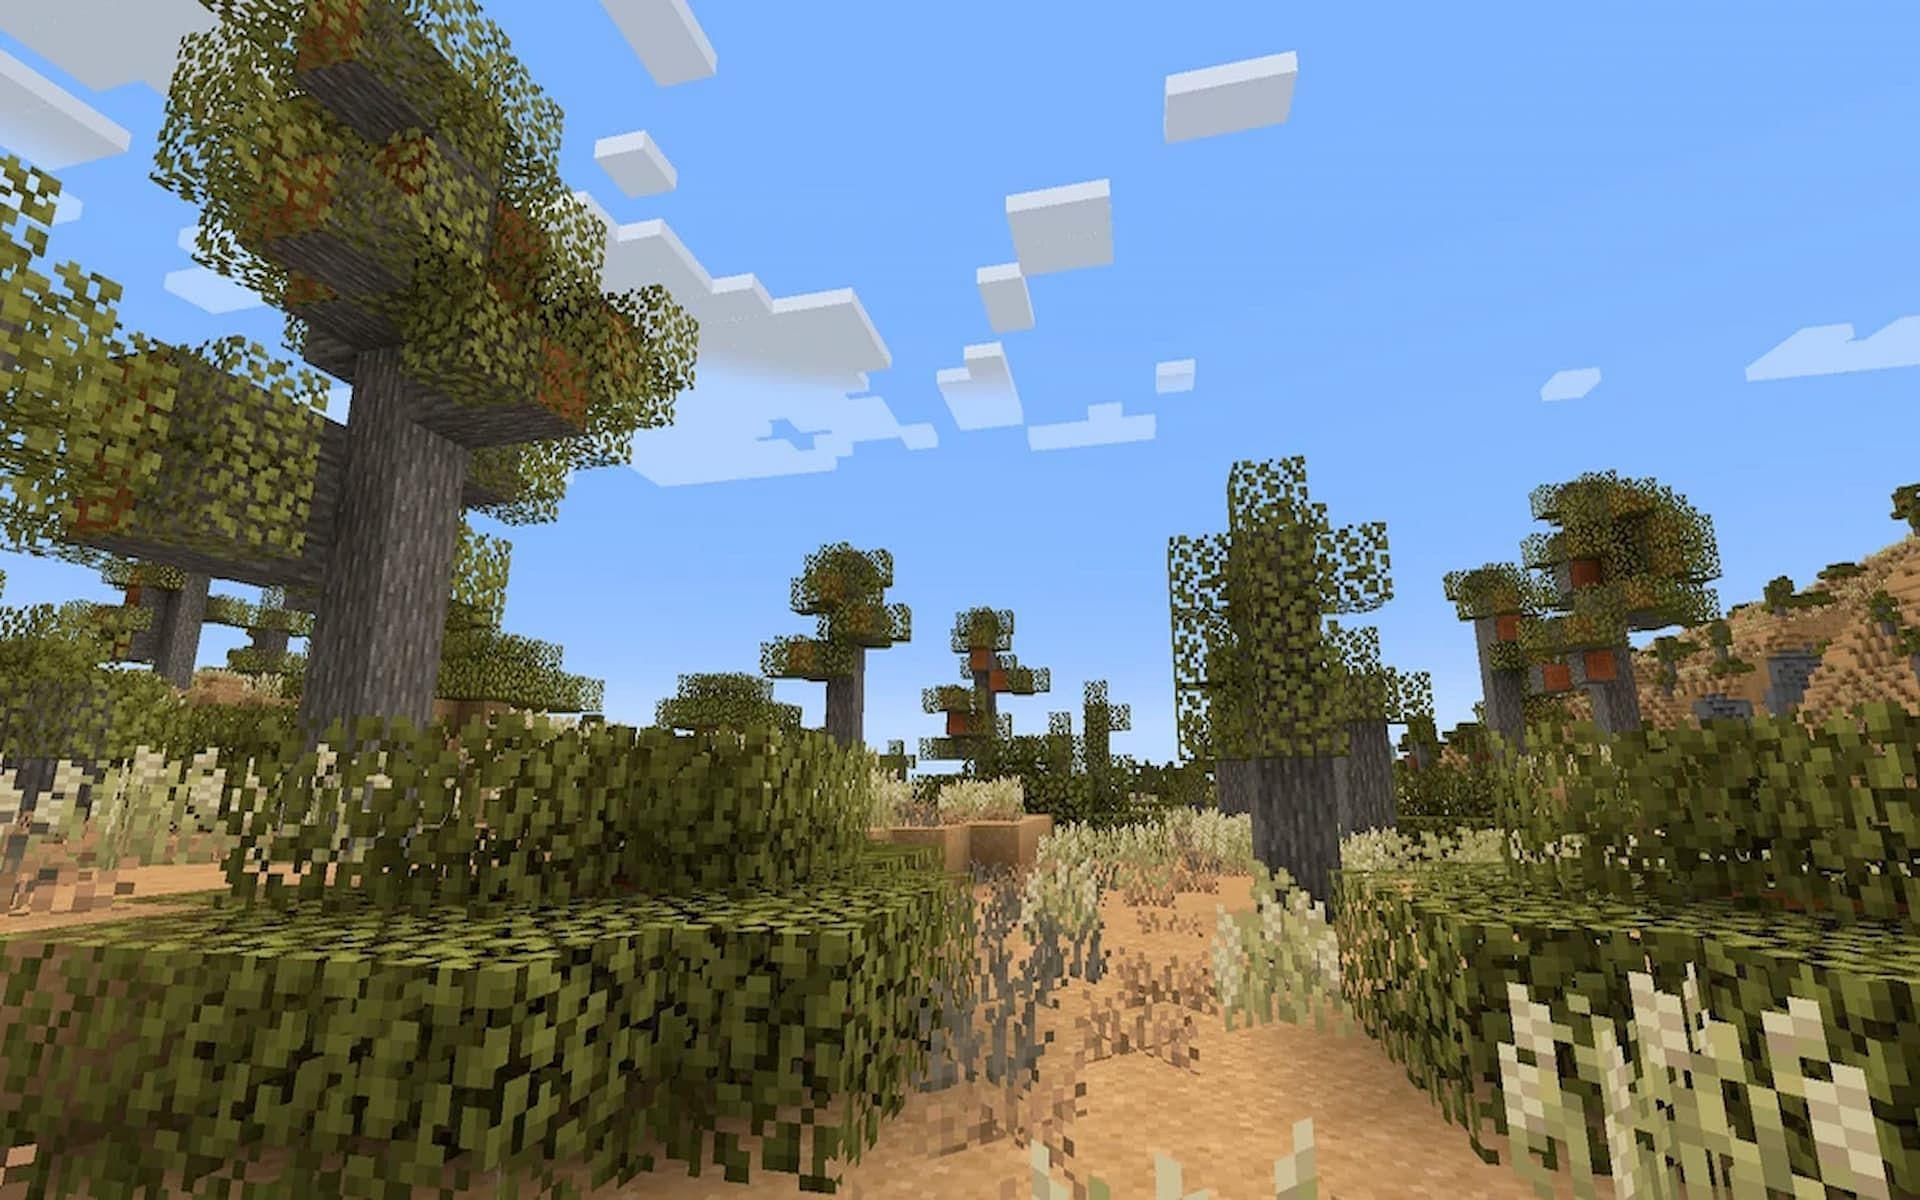 The Lush Desert biome offered by the Biomes O Plenty Mod